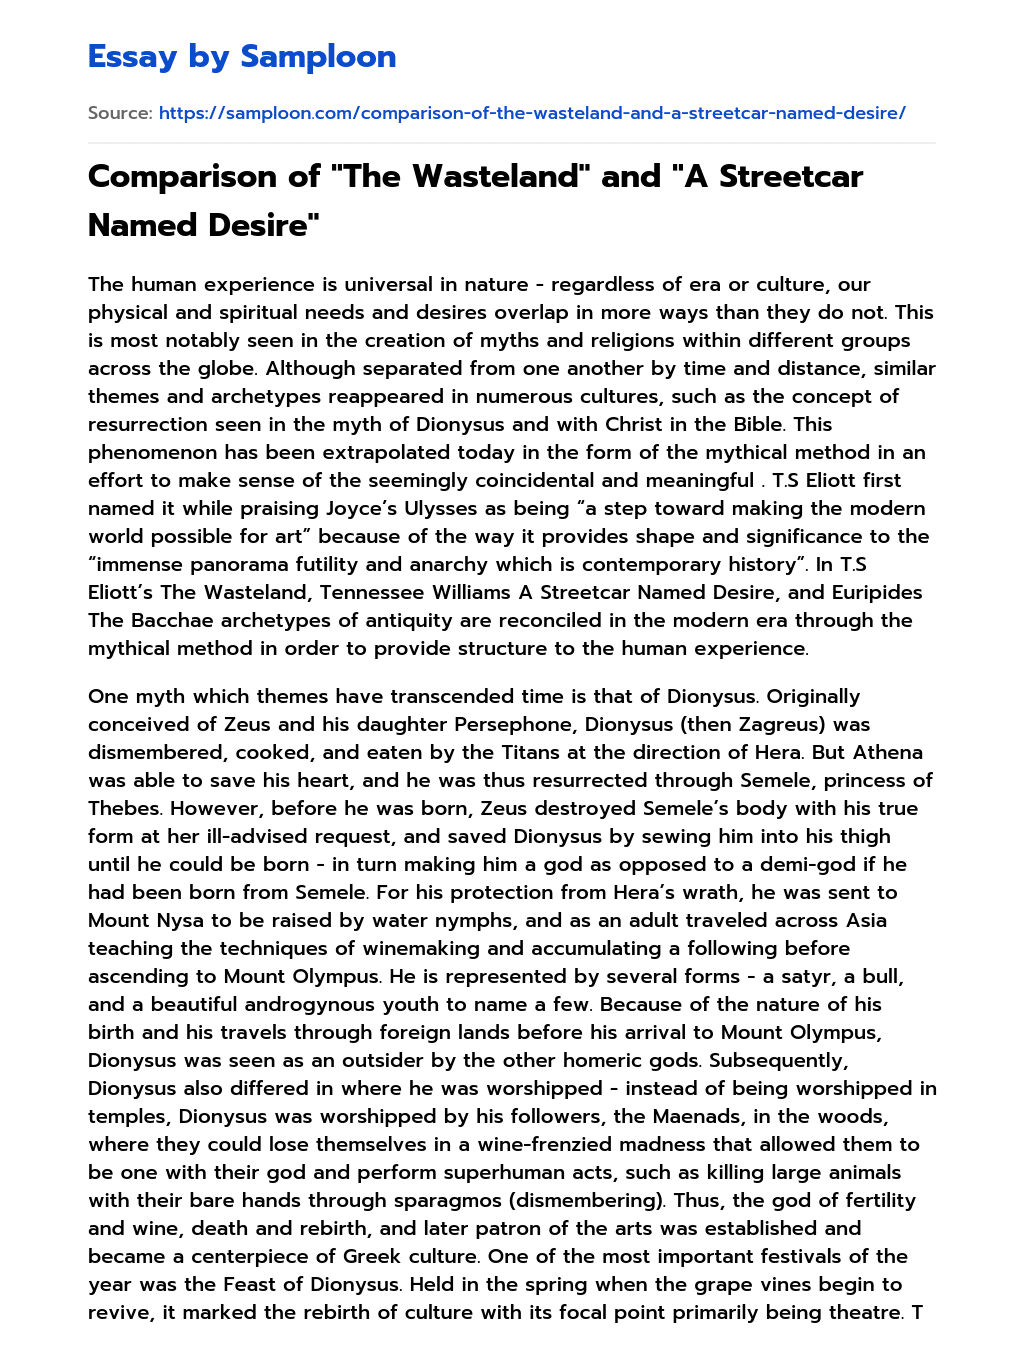 Comparison of “The Wasteland” and “A Streetcar Named Desire” essay